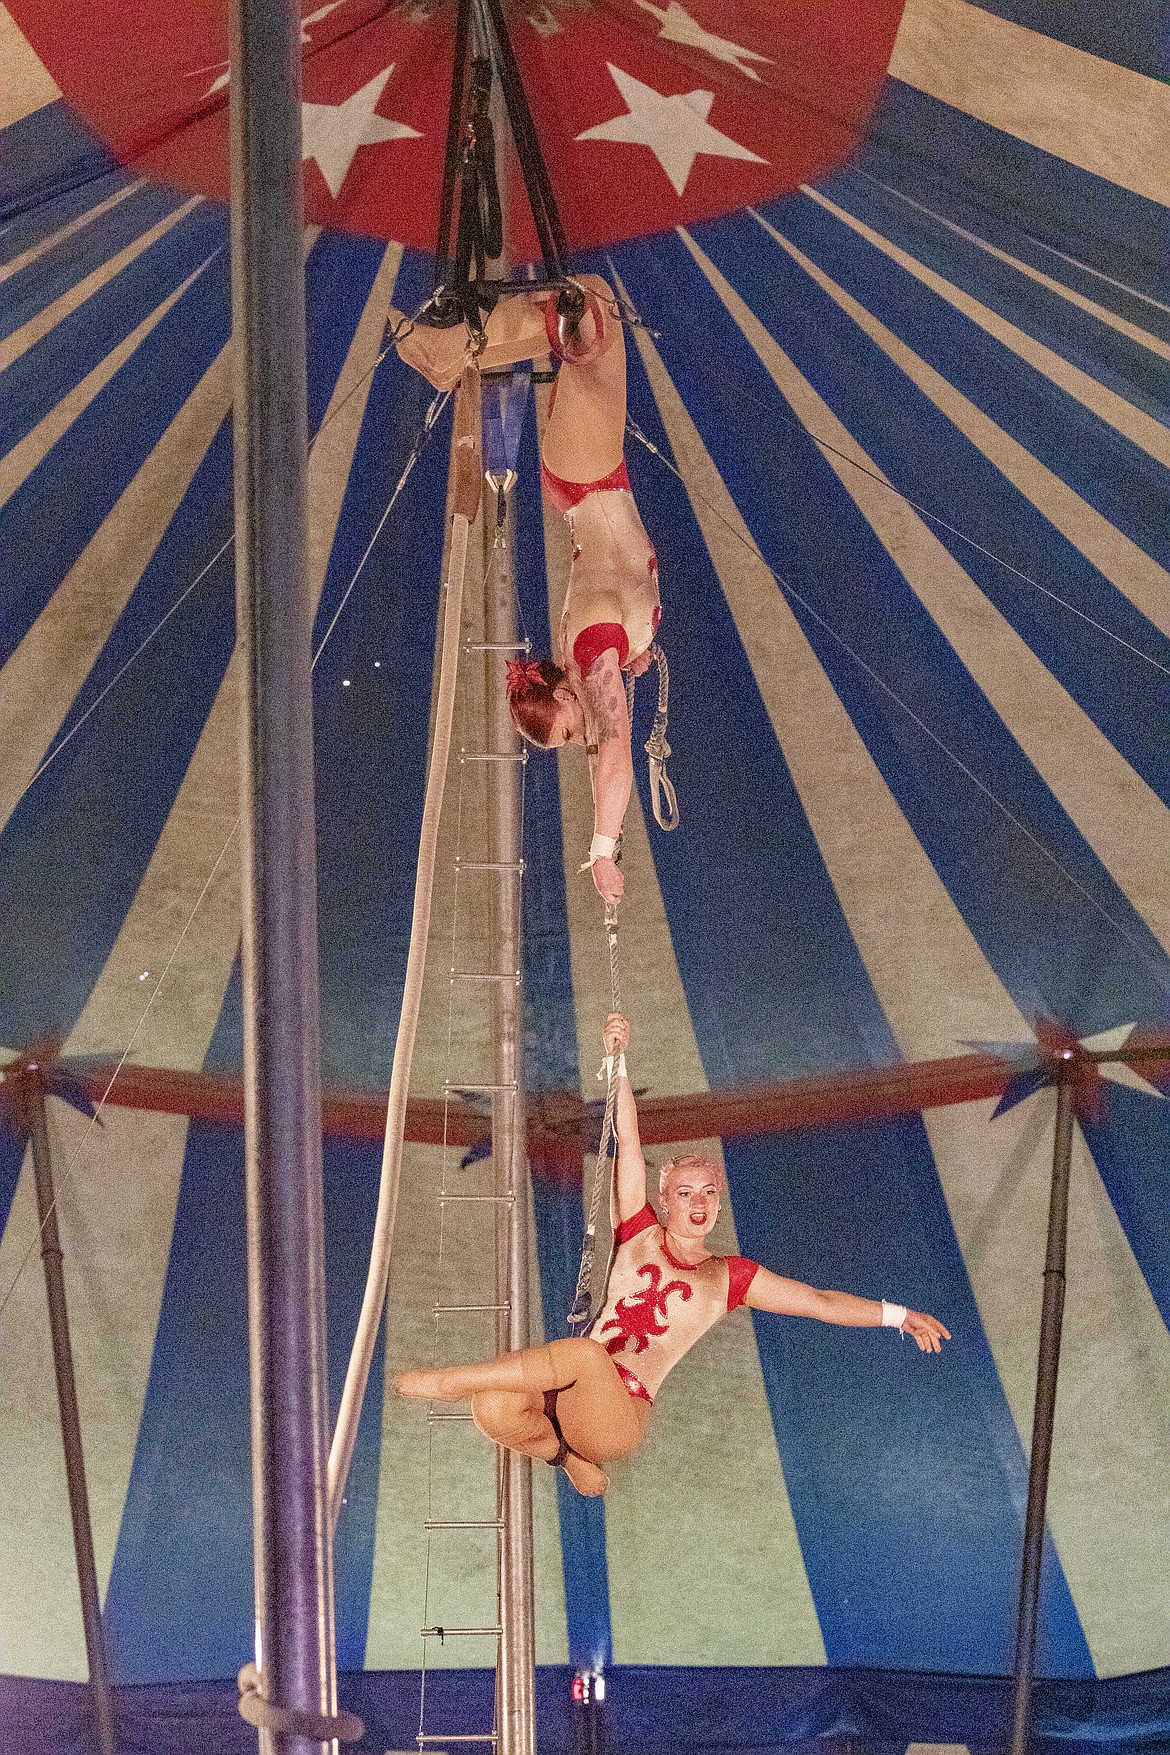 Trapeze aerial artist Simone Key and Kelly Leeth kept the crowd on the edge of their seats with their death-defying aerial stunts during the Culpepper & Merriweather Circus in Ronan on Saturday afternoon.